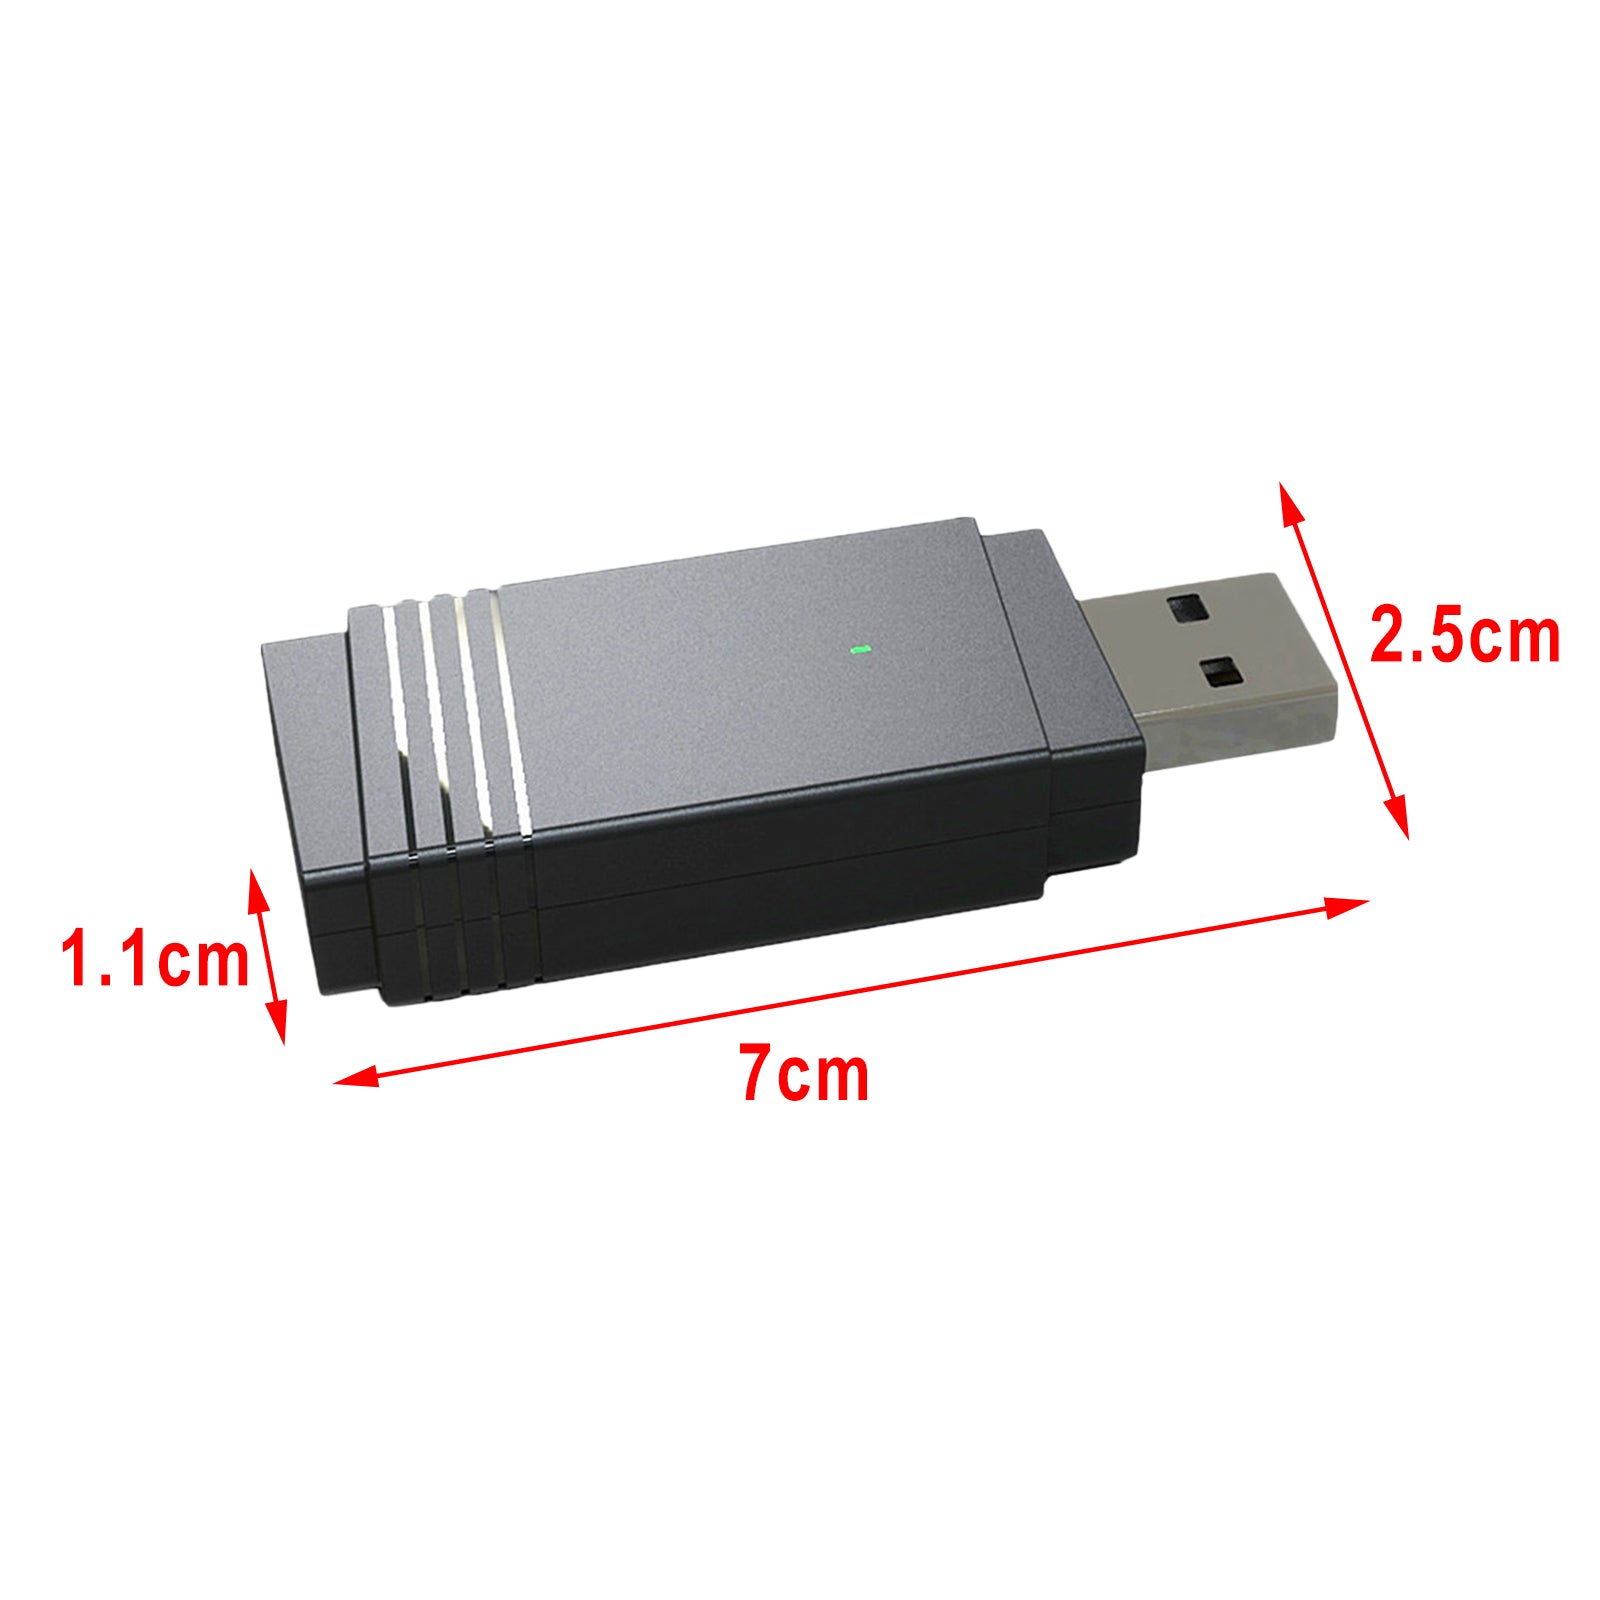 Mini Dual Band 1300Mbps USB WiFi Wireless Adapter For Laptop PC Desktop